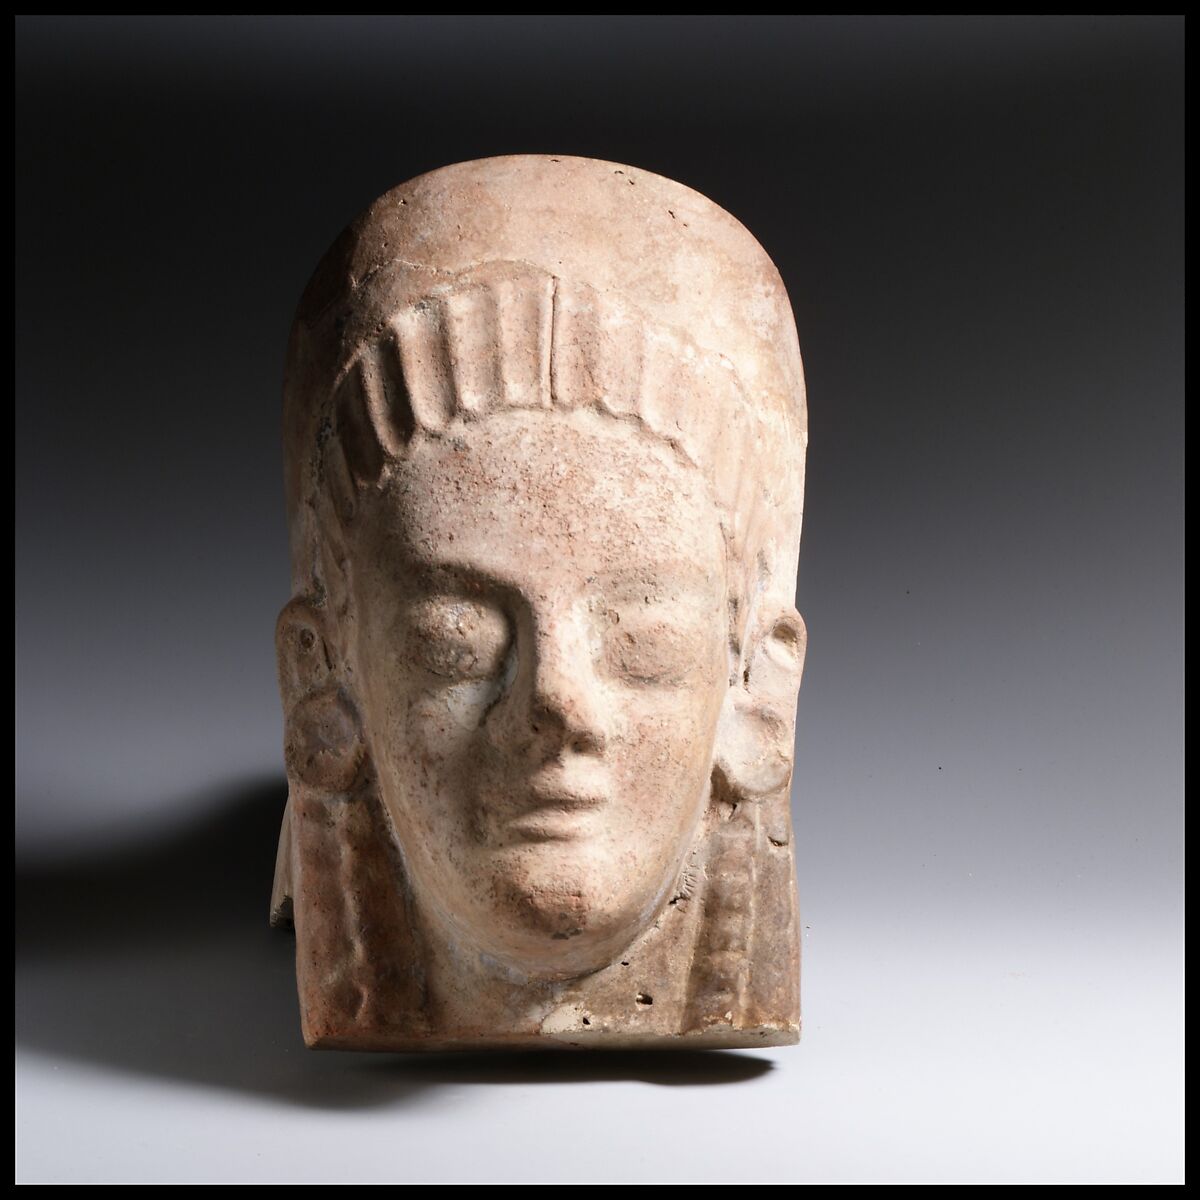 Terracotta antefix (roof tile) with head of a woman, Terracotta, Etruscan, Cerveteri 